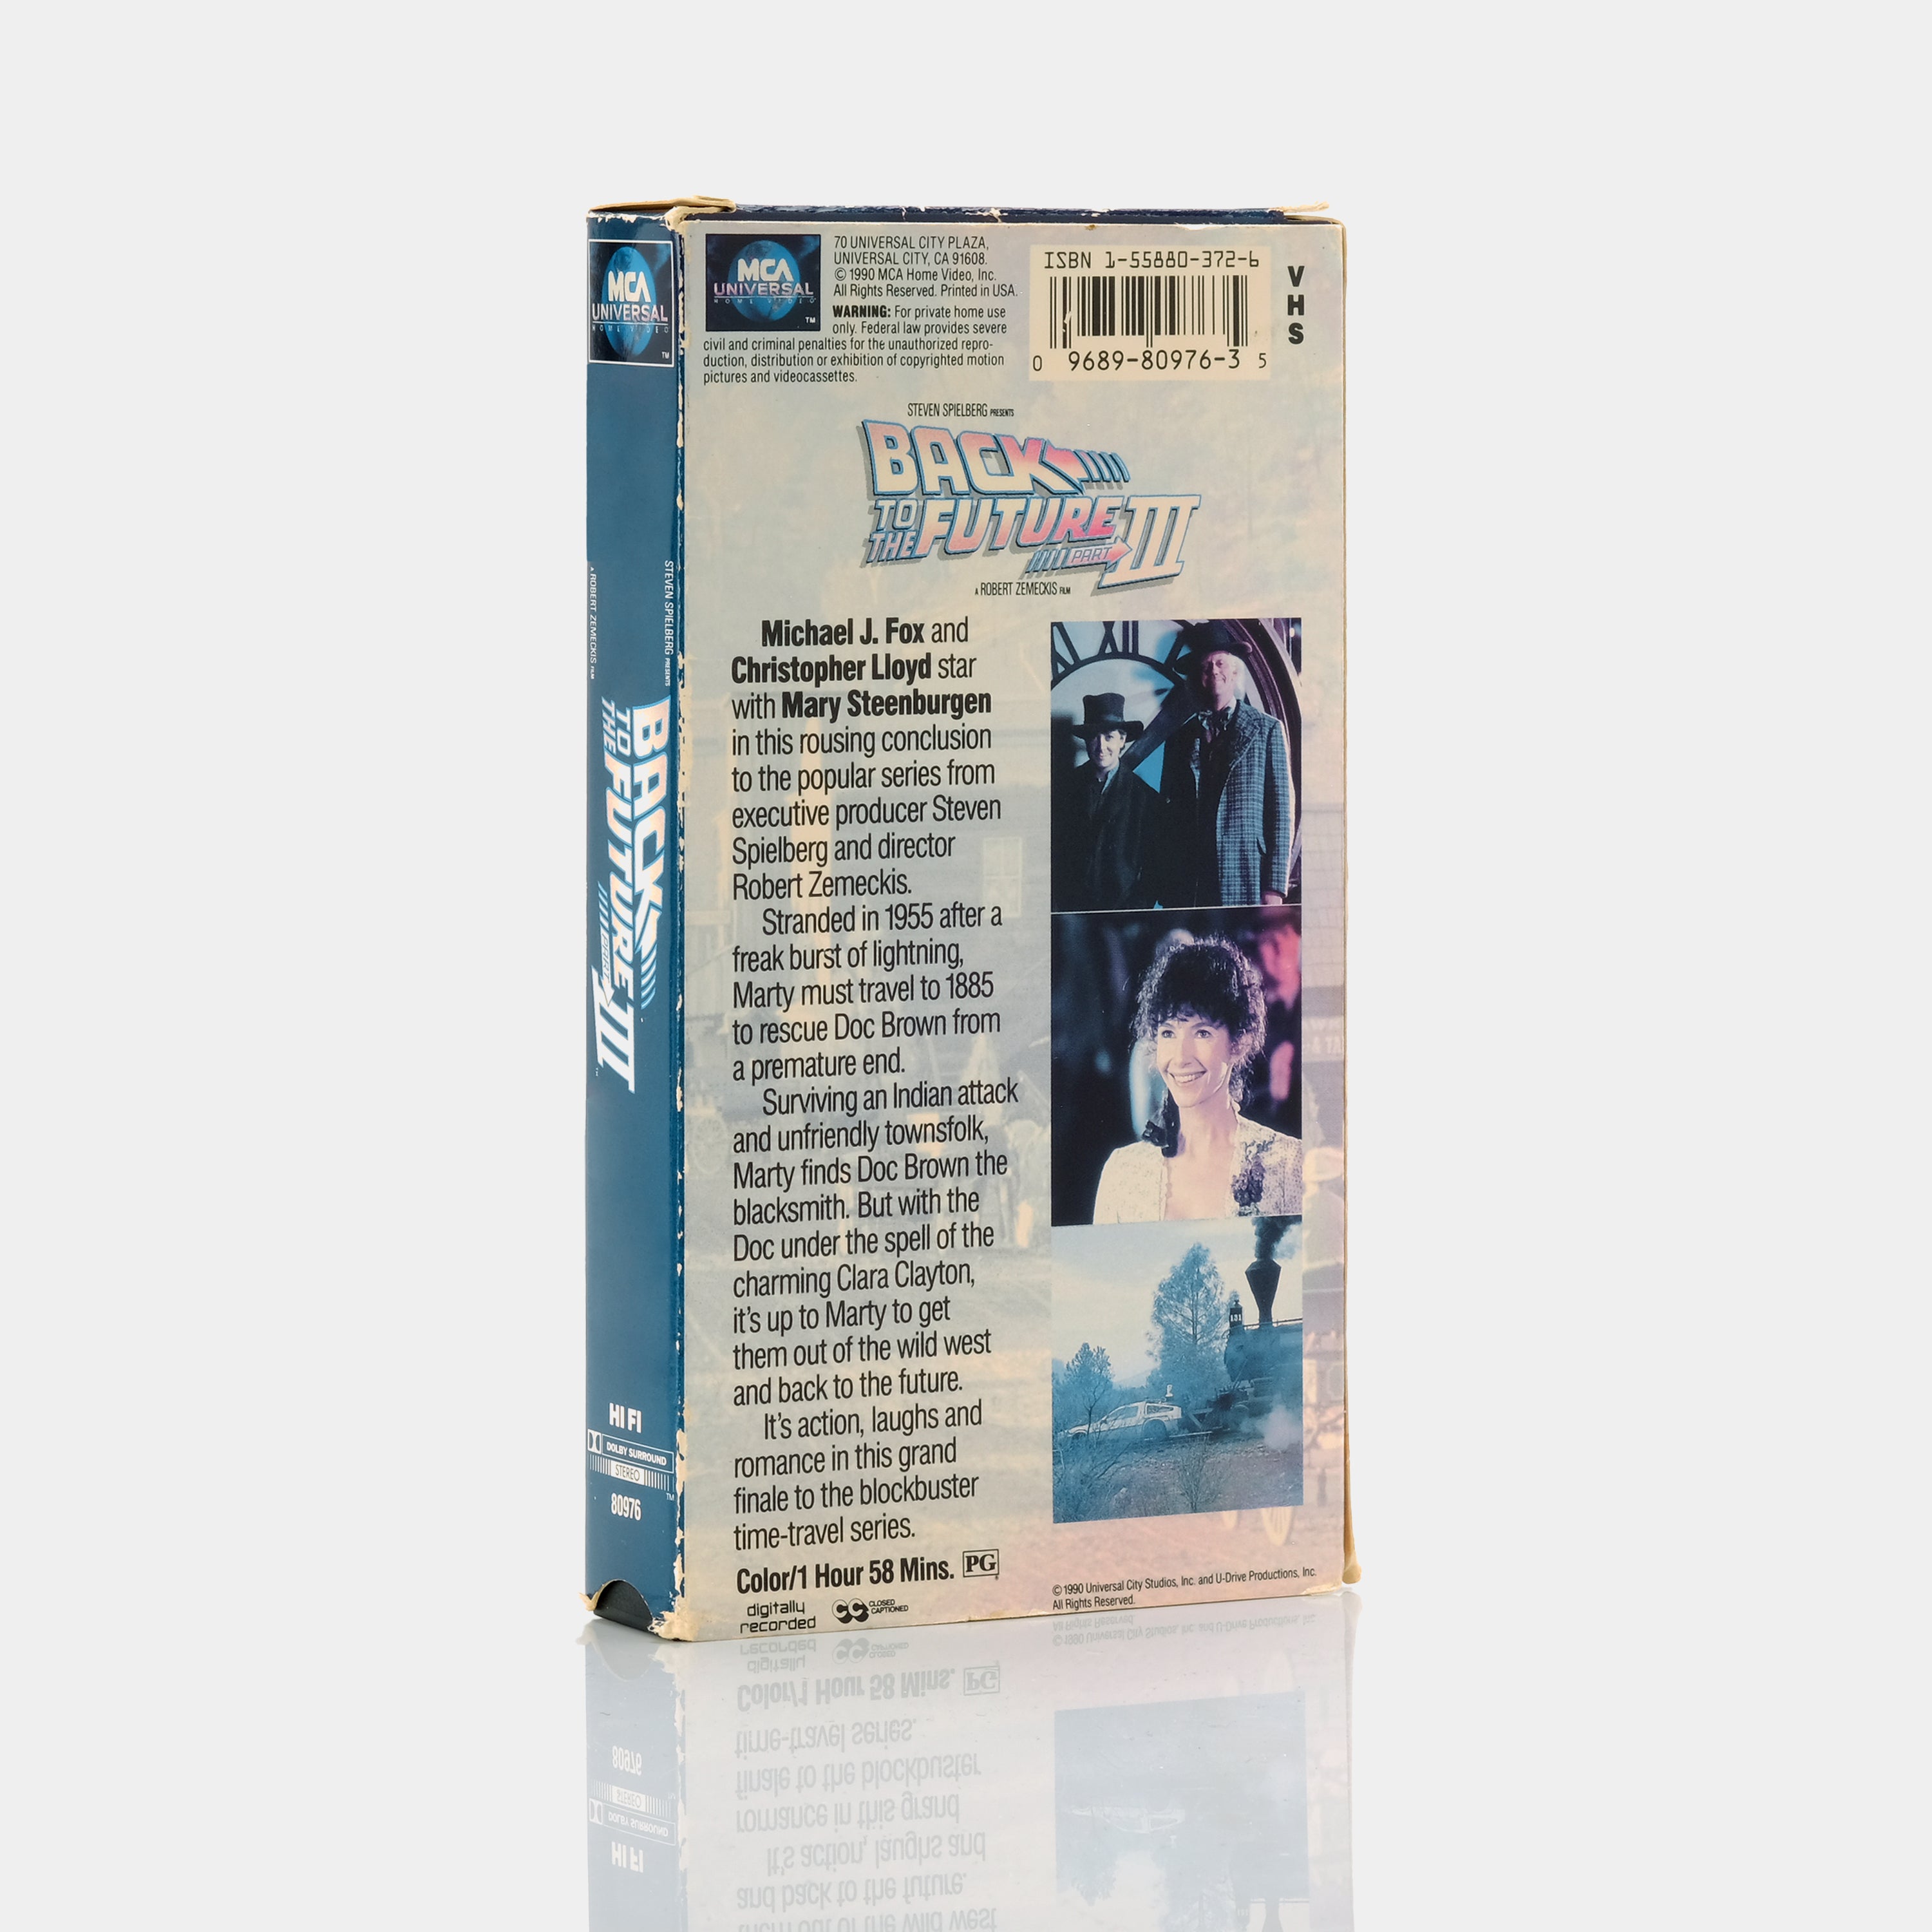 Back To The Future Part III VHS Tape